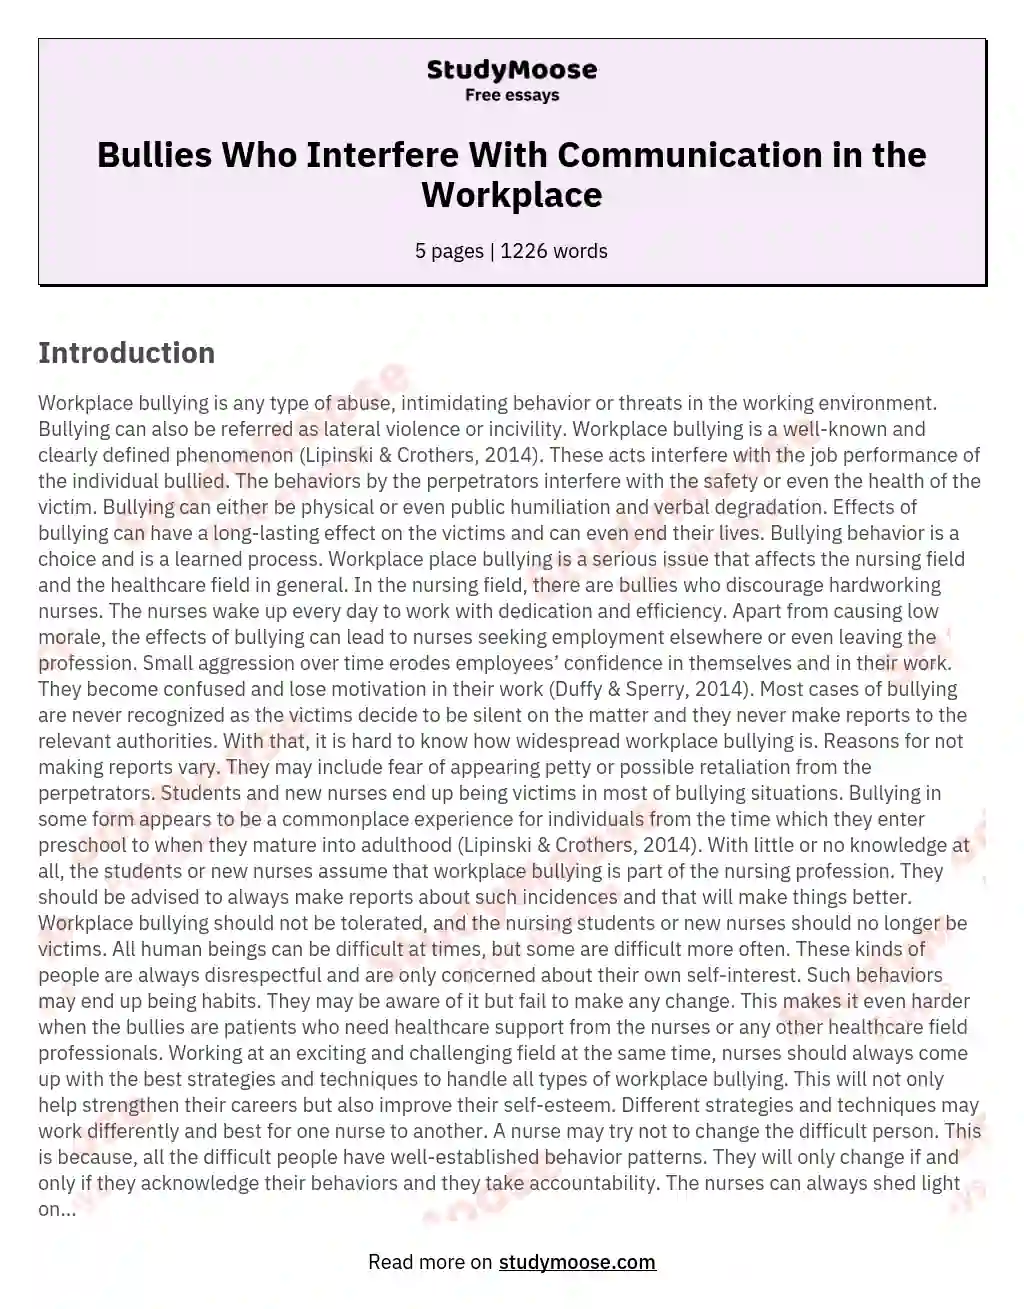 Bullies Who Interfere With Communication in the Workplace essay